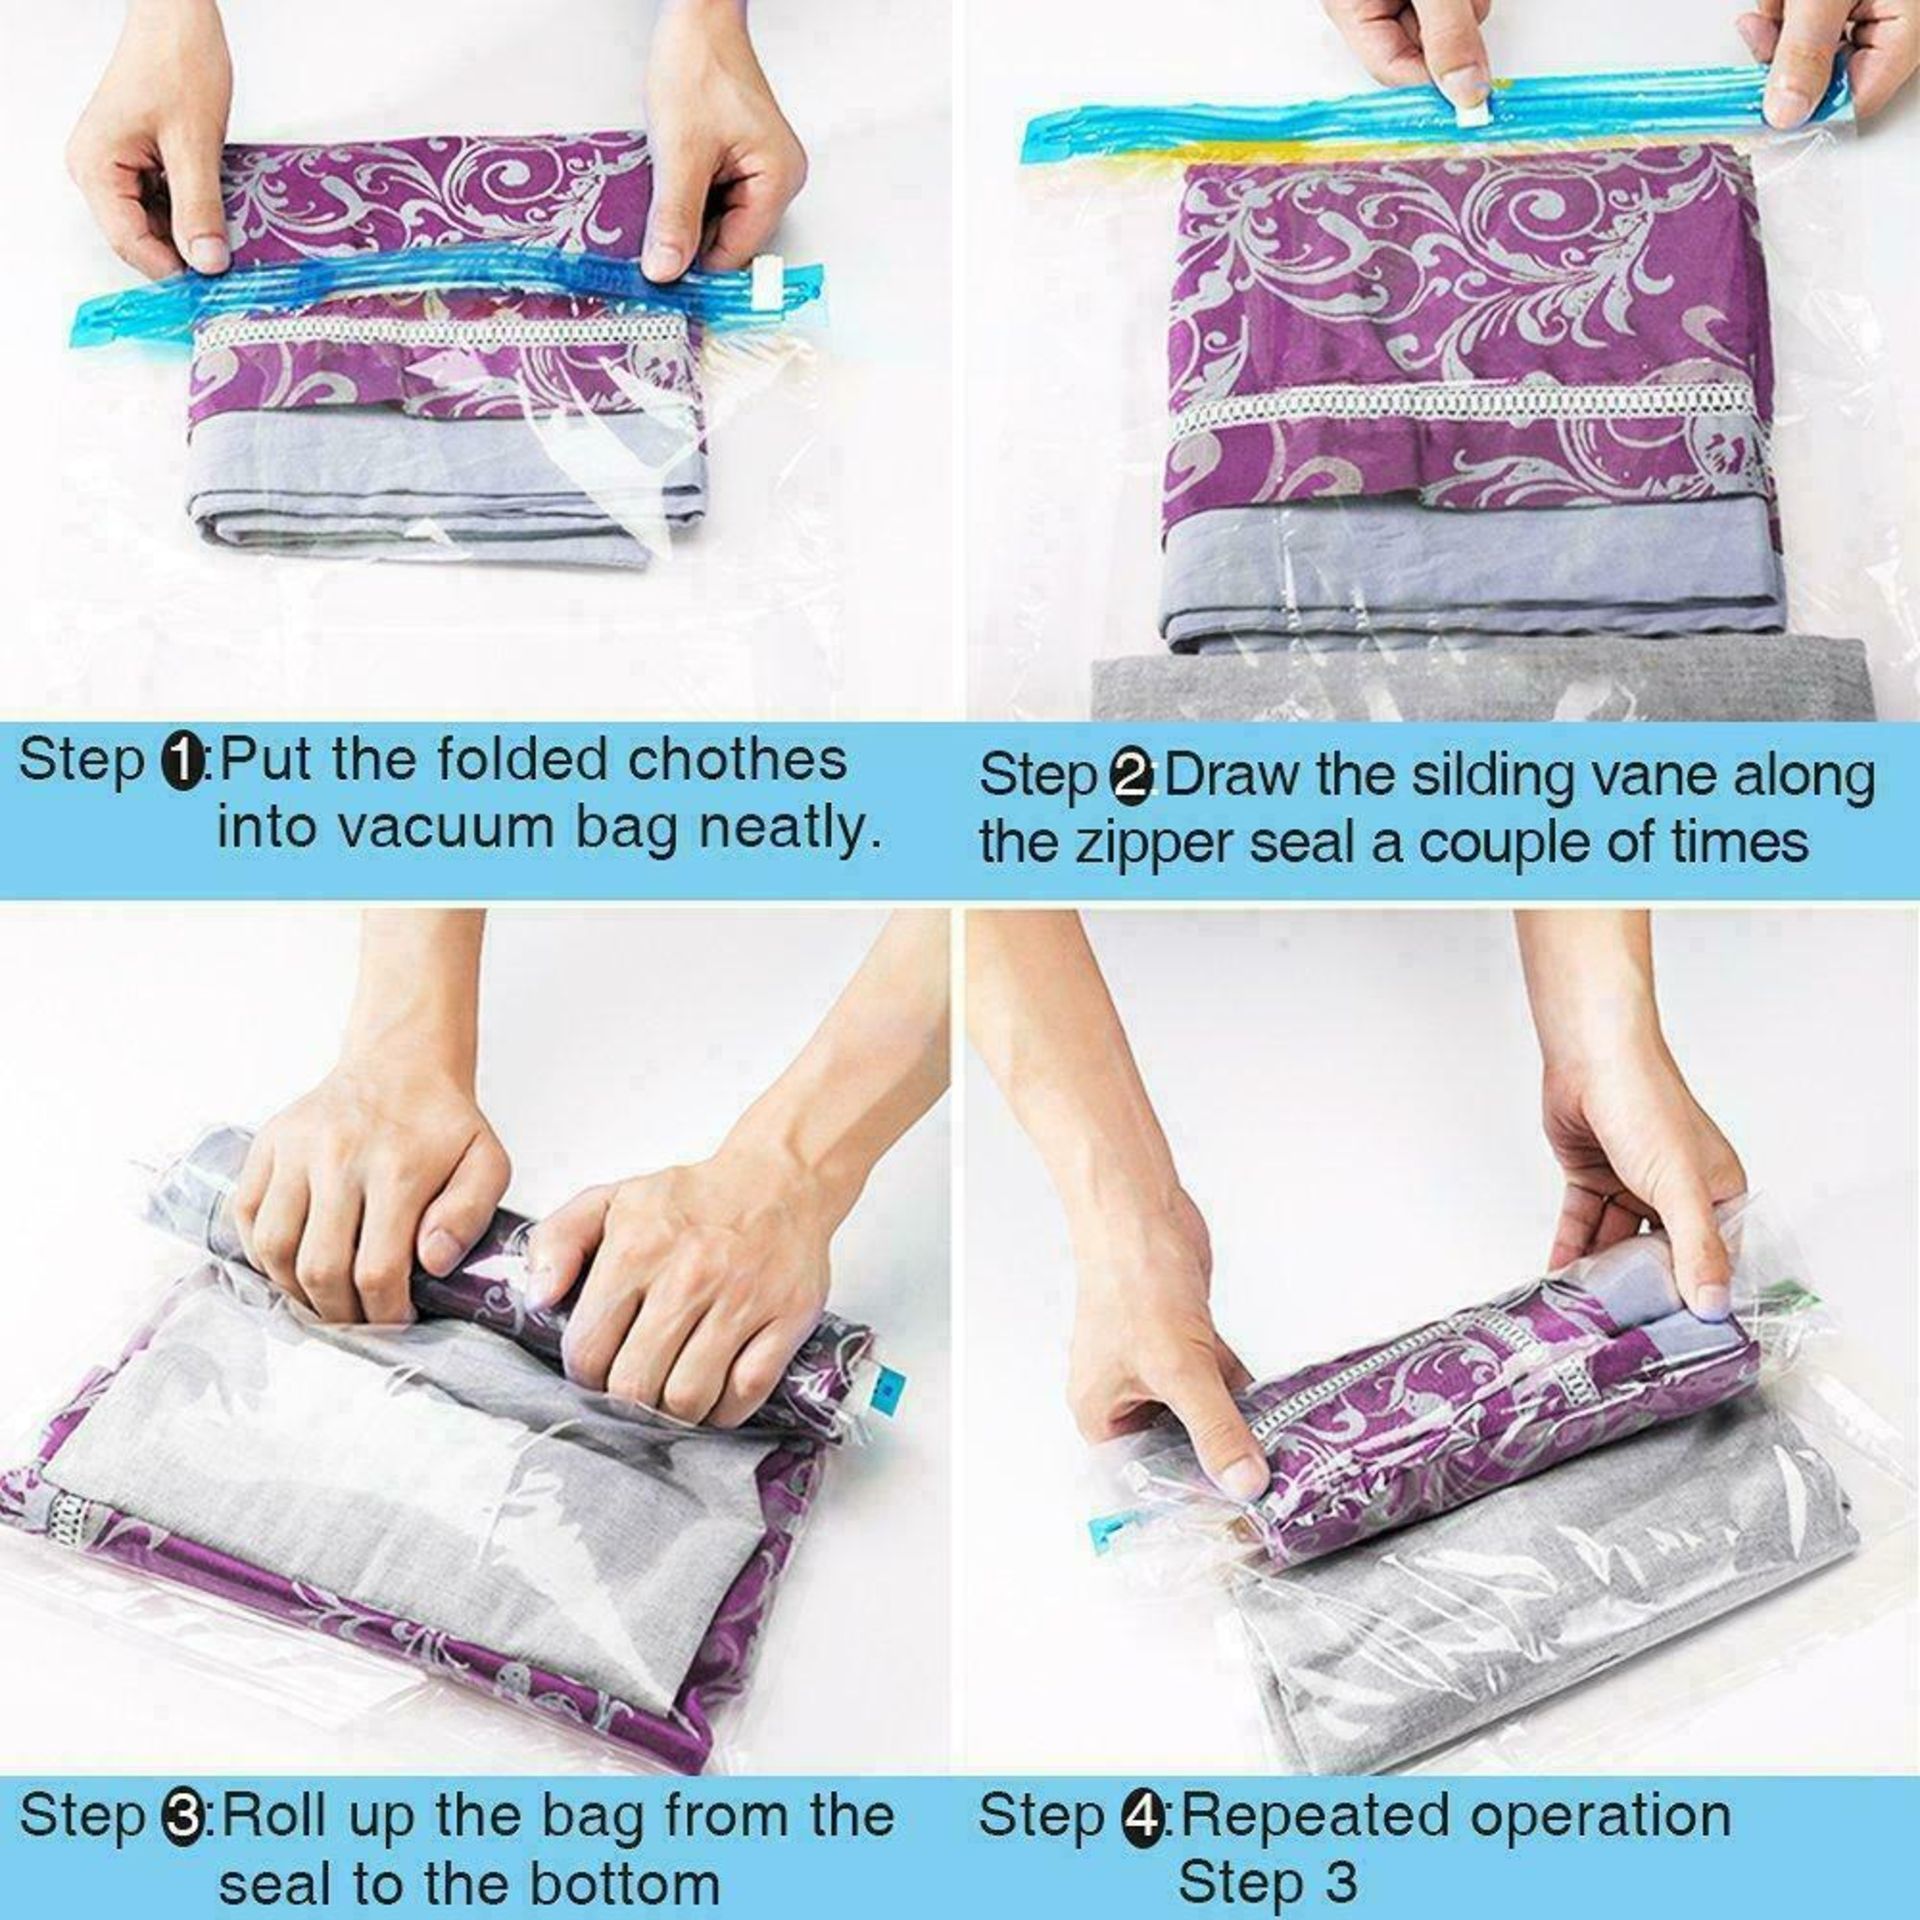 5 X NONZERS 12 Pcs Travel Vacuum Bags, Roll-up Space Saver Airtight Reusable Bags - Image 4 of 4